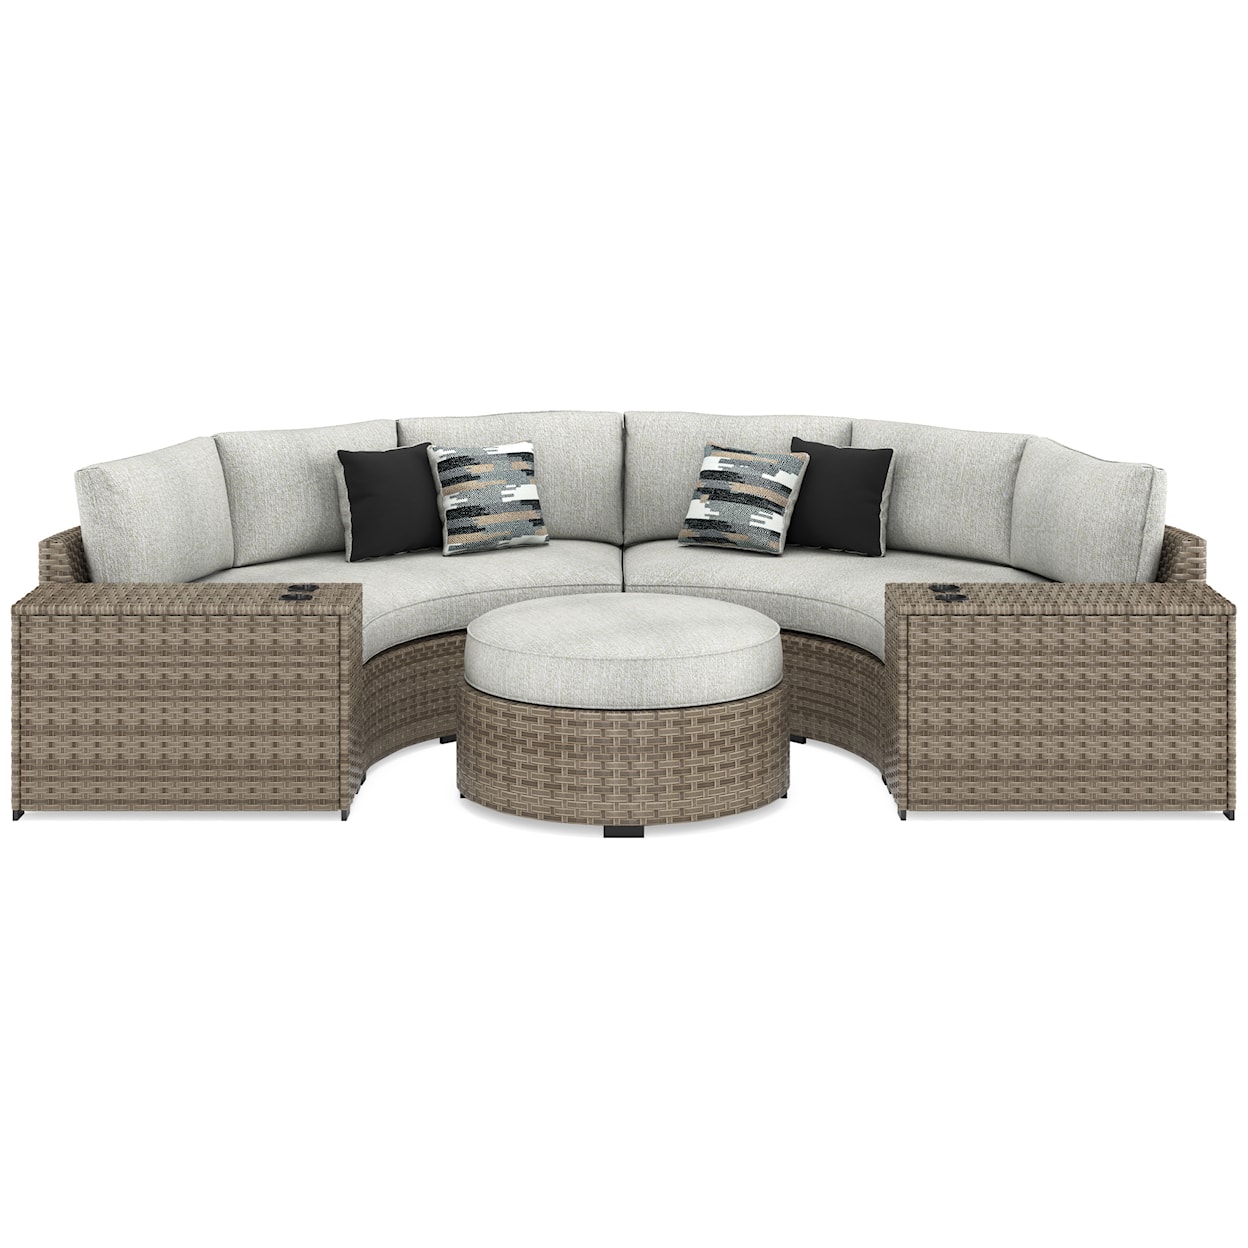 Ashley Signature Design Calworth 4-Piece Outdoor Sectional